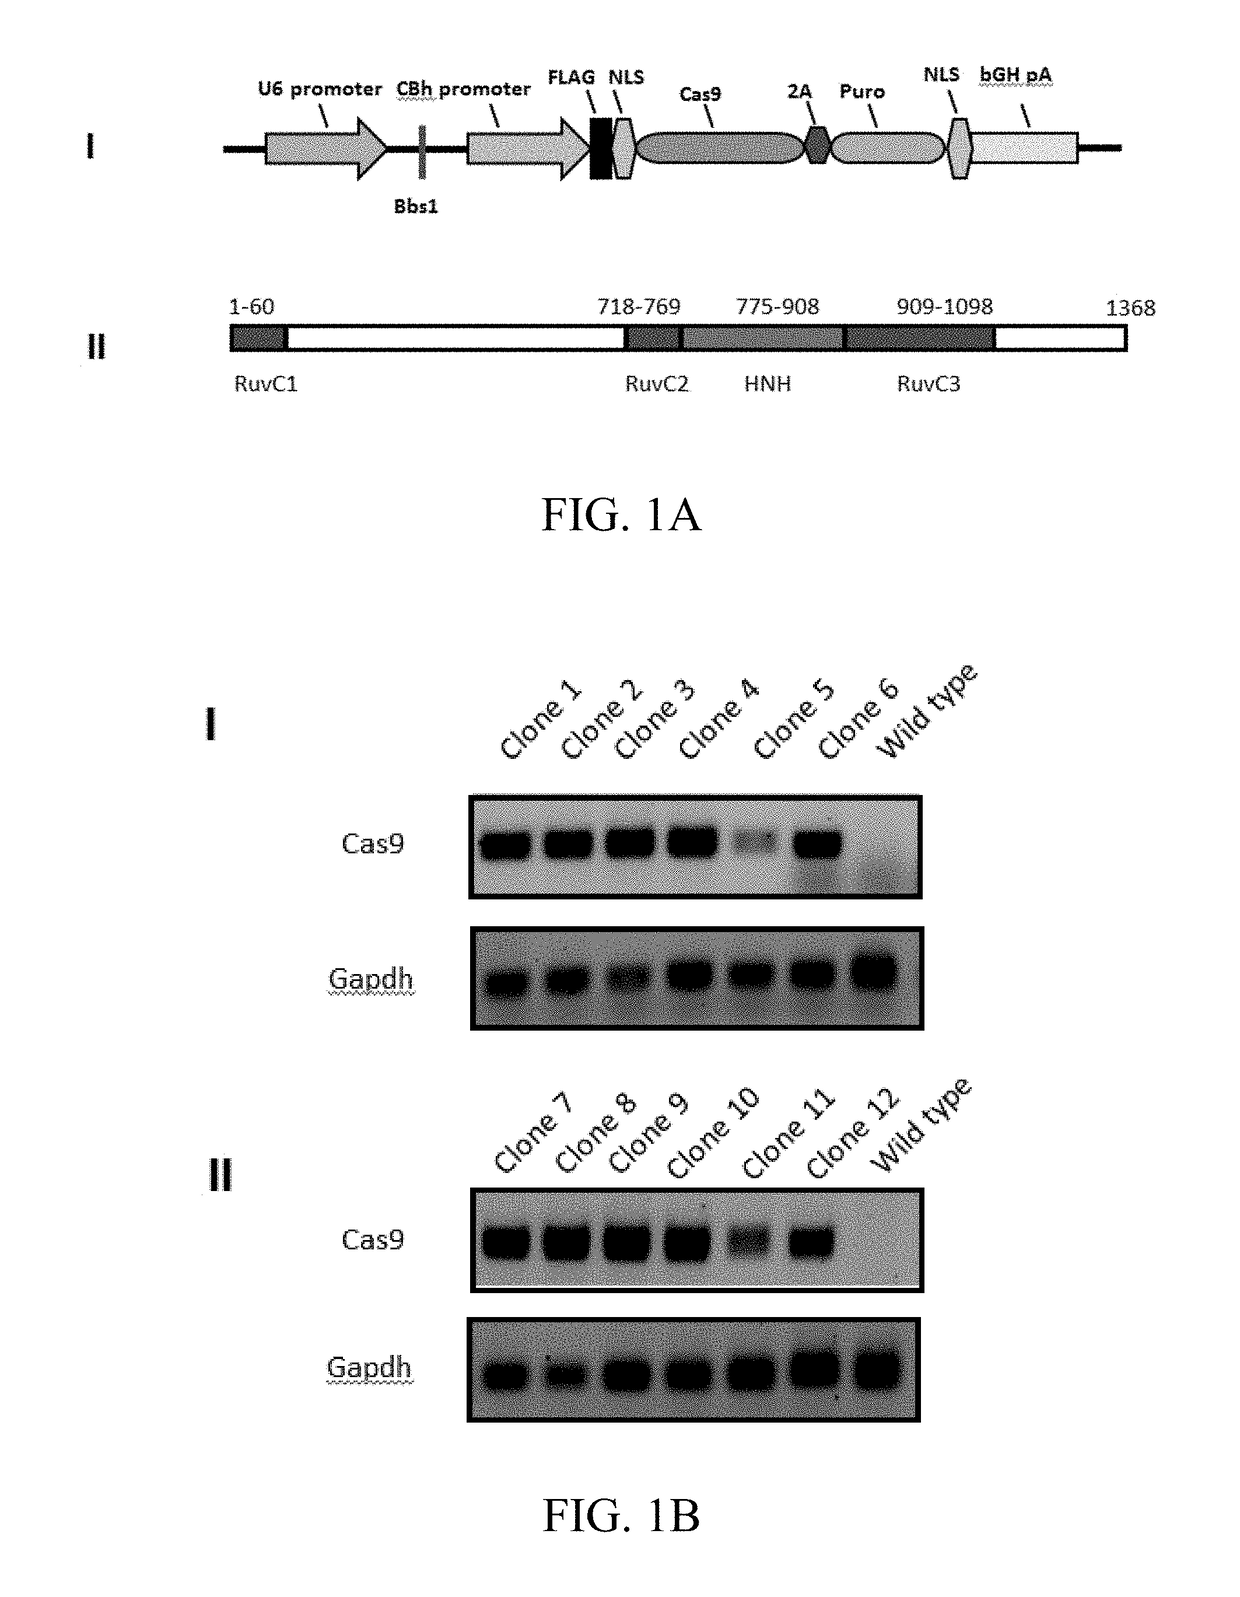 Methods for screening and using crispr/cas9 guidance RNA sequence from HIV provirus genome